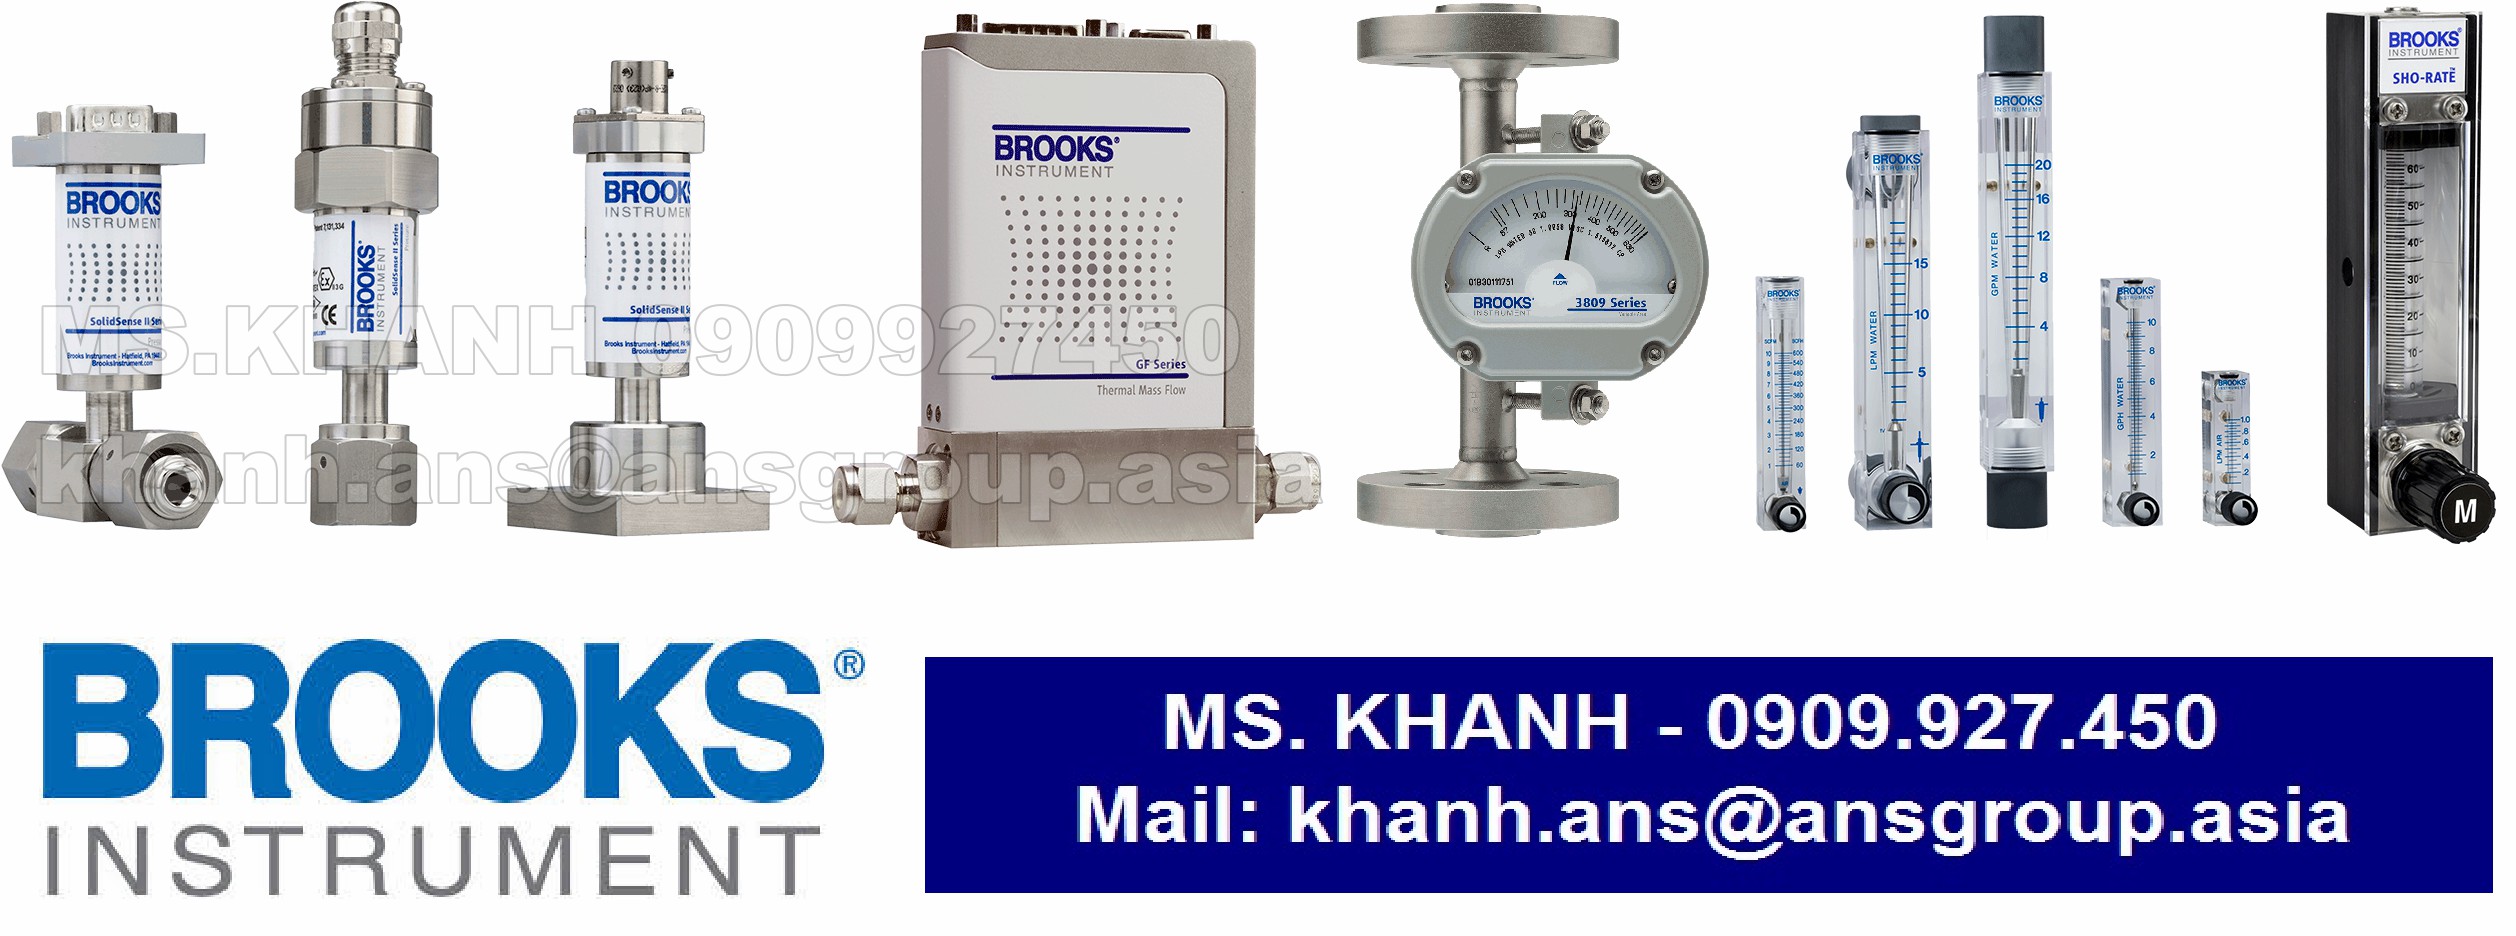 may-do-luu-luong-3809gbd08dbab1d2a000-metal-tube-variable-area-flow-meters-brook-instrument-vietnam.png